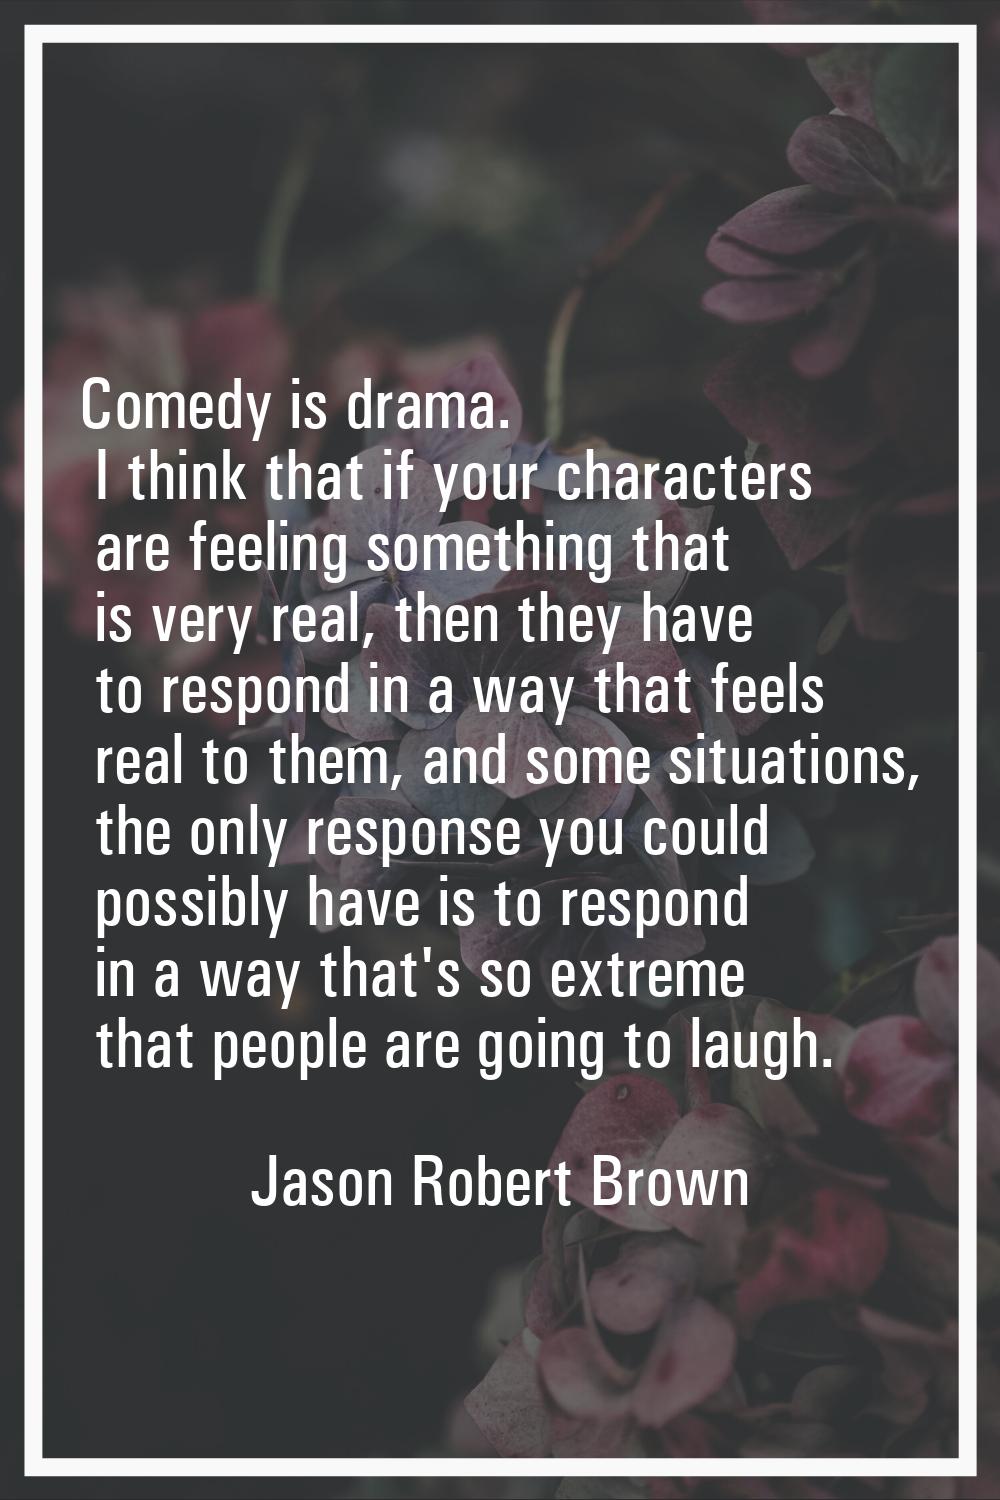 Comedy is drama. I think that if your characters are feeling something that is very real, then they